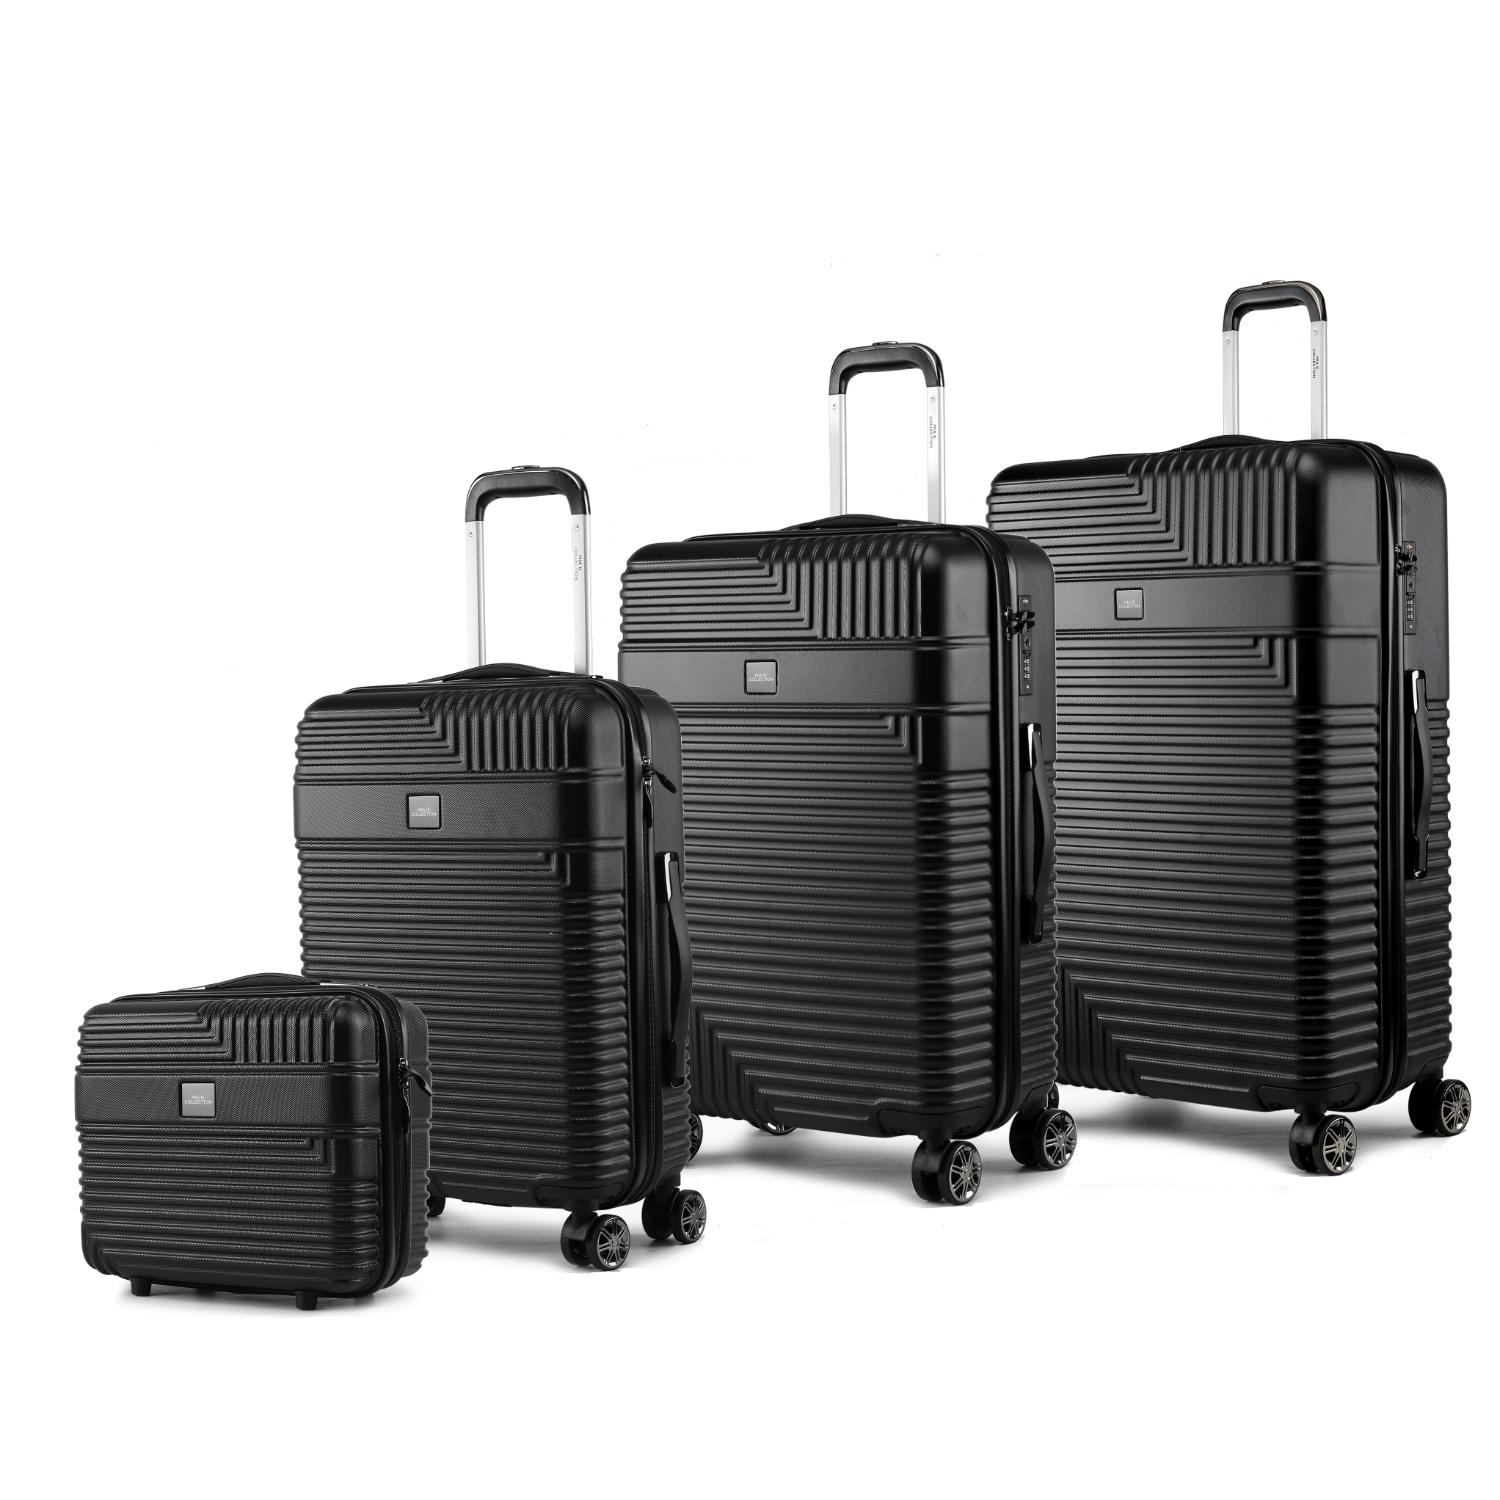 MKF Collection Mykonos Luggage Set- Extra Large Check-in, Large Check-in, Medium Carry-on, And Small Cosmetic Case 4 Pieces By Mia K - Navy